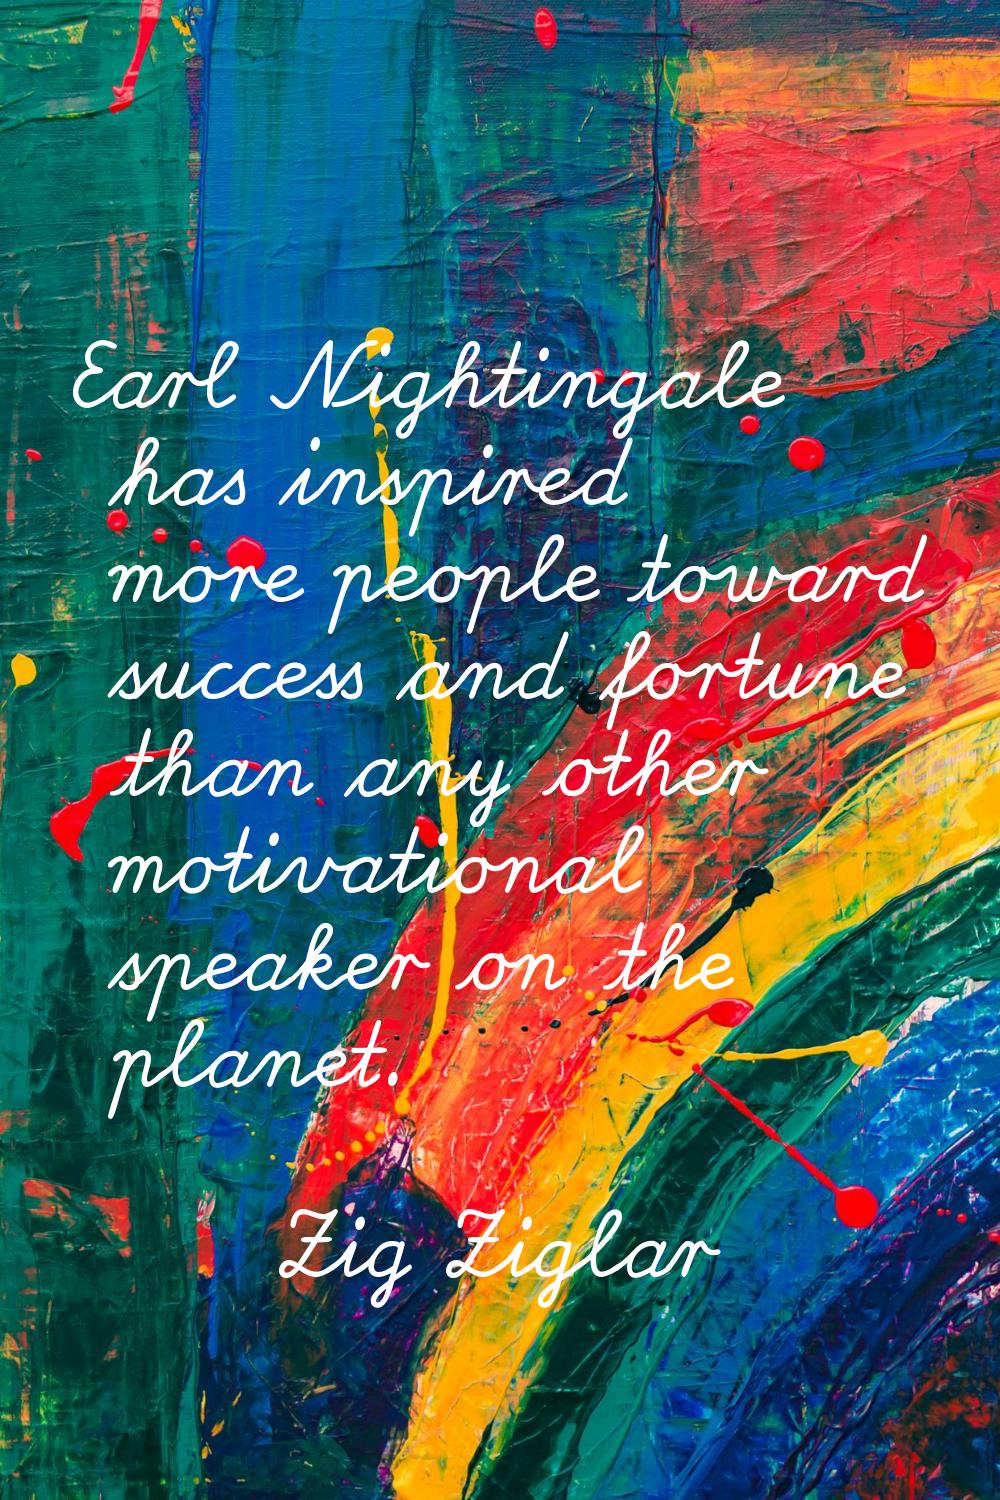 Earl Nightingale has inspired more people toward success and fortune than any other motivational sp